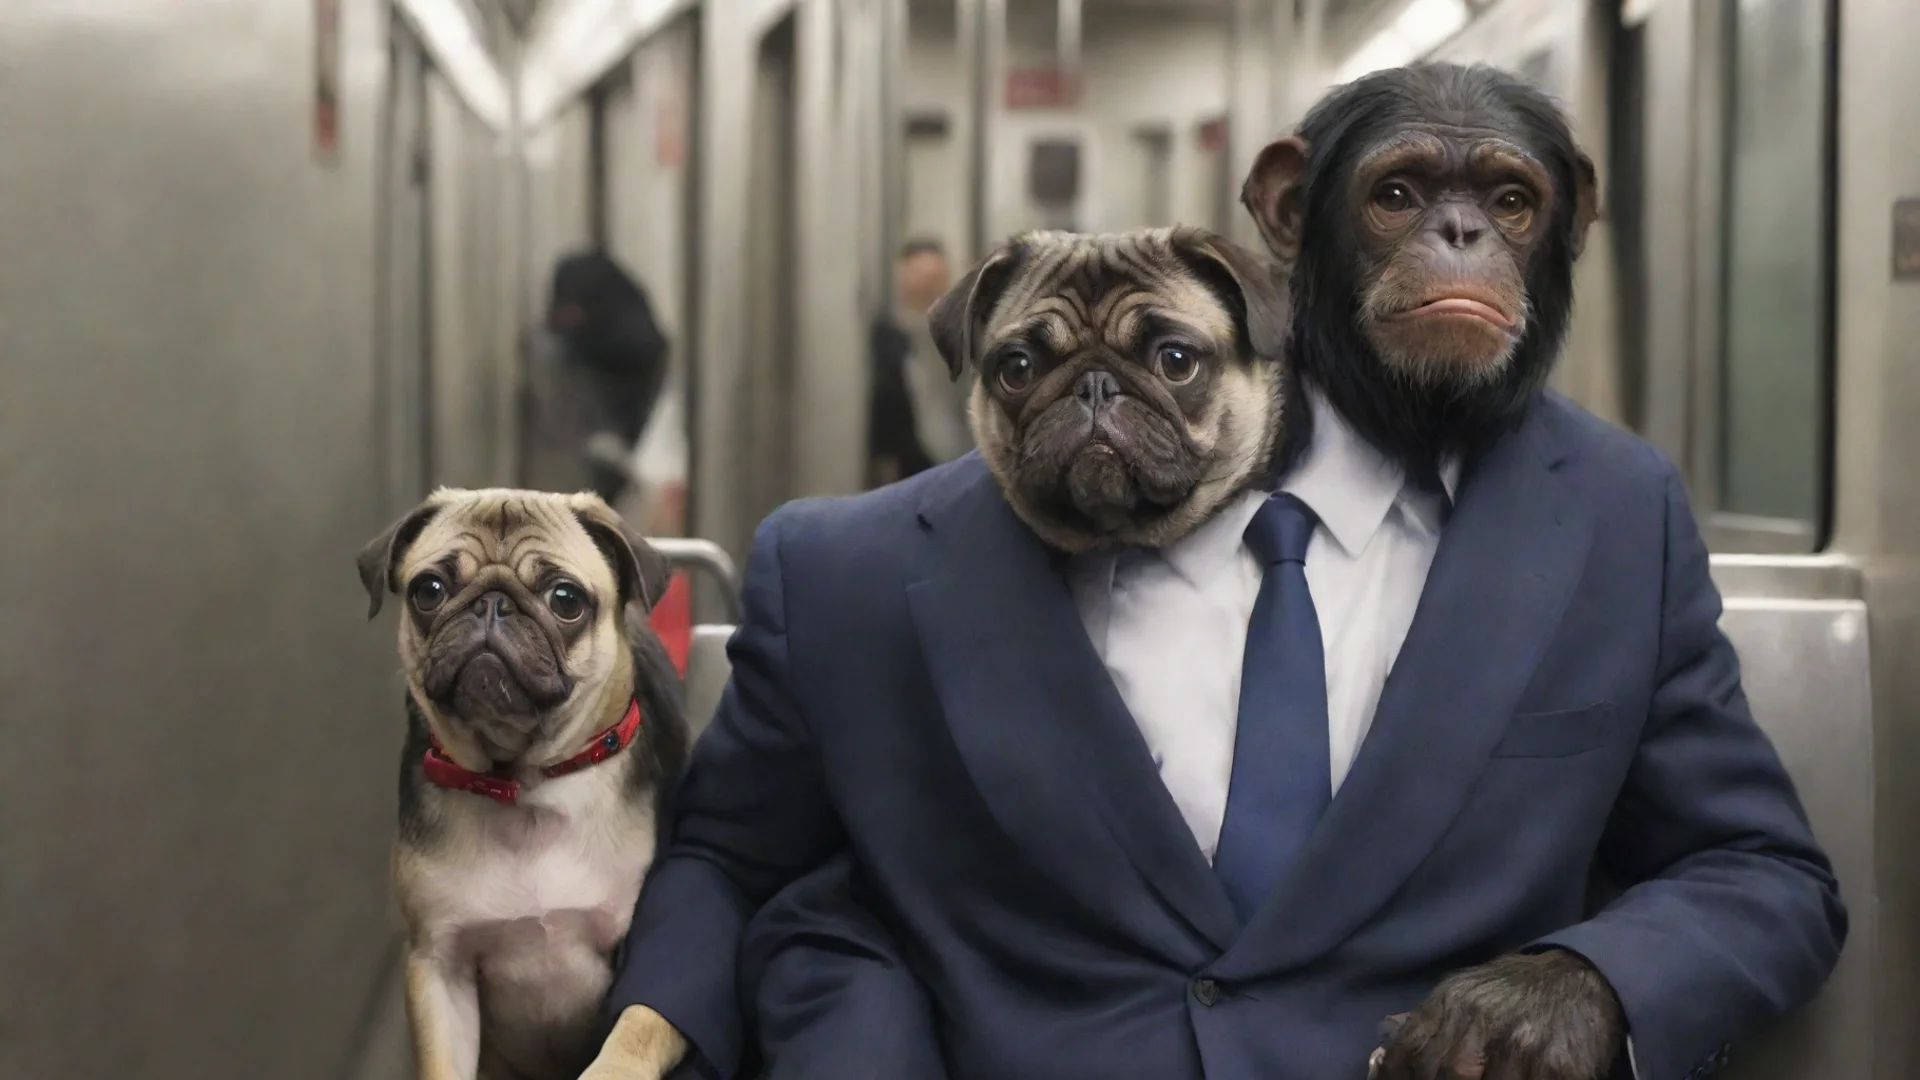 aia pug and a chimpanzee wearing business suits riding the subway to work. wide